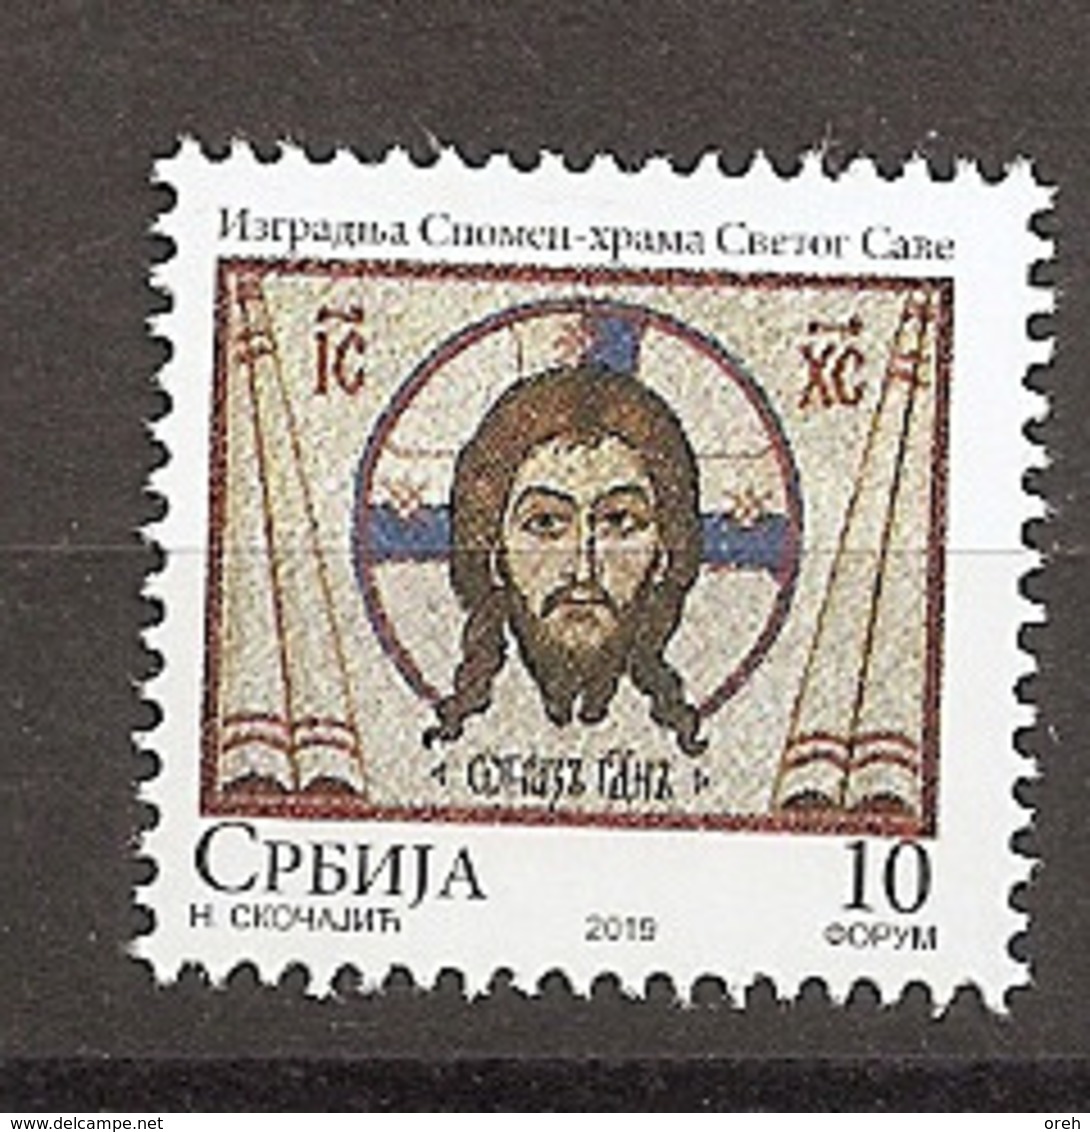 SERBIA 2019, SAINT SAVA TEMPLE ,RELIGION CHRISTIANITY, TAX,,SURCHARGE,ADITIONAL STAMP,MNH - Serbien